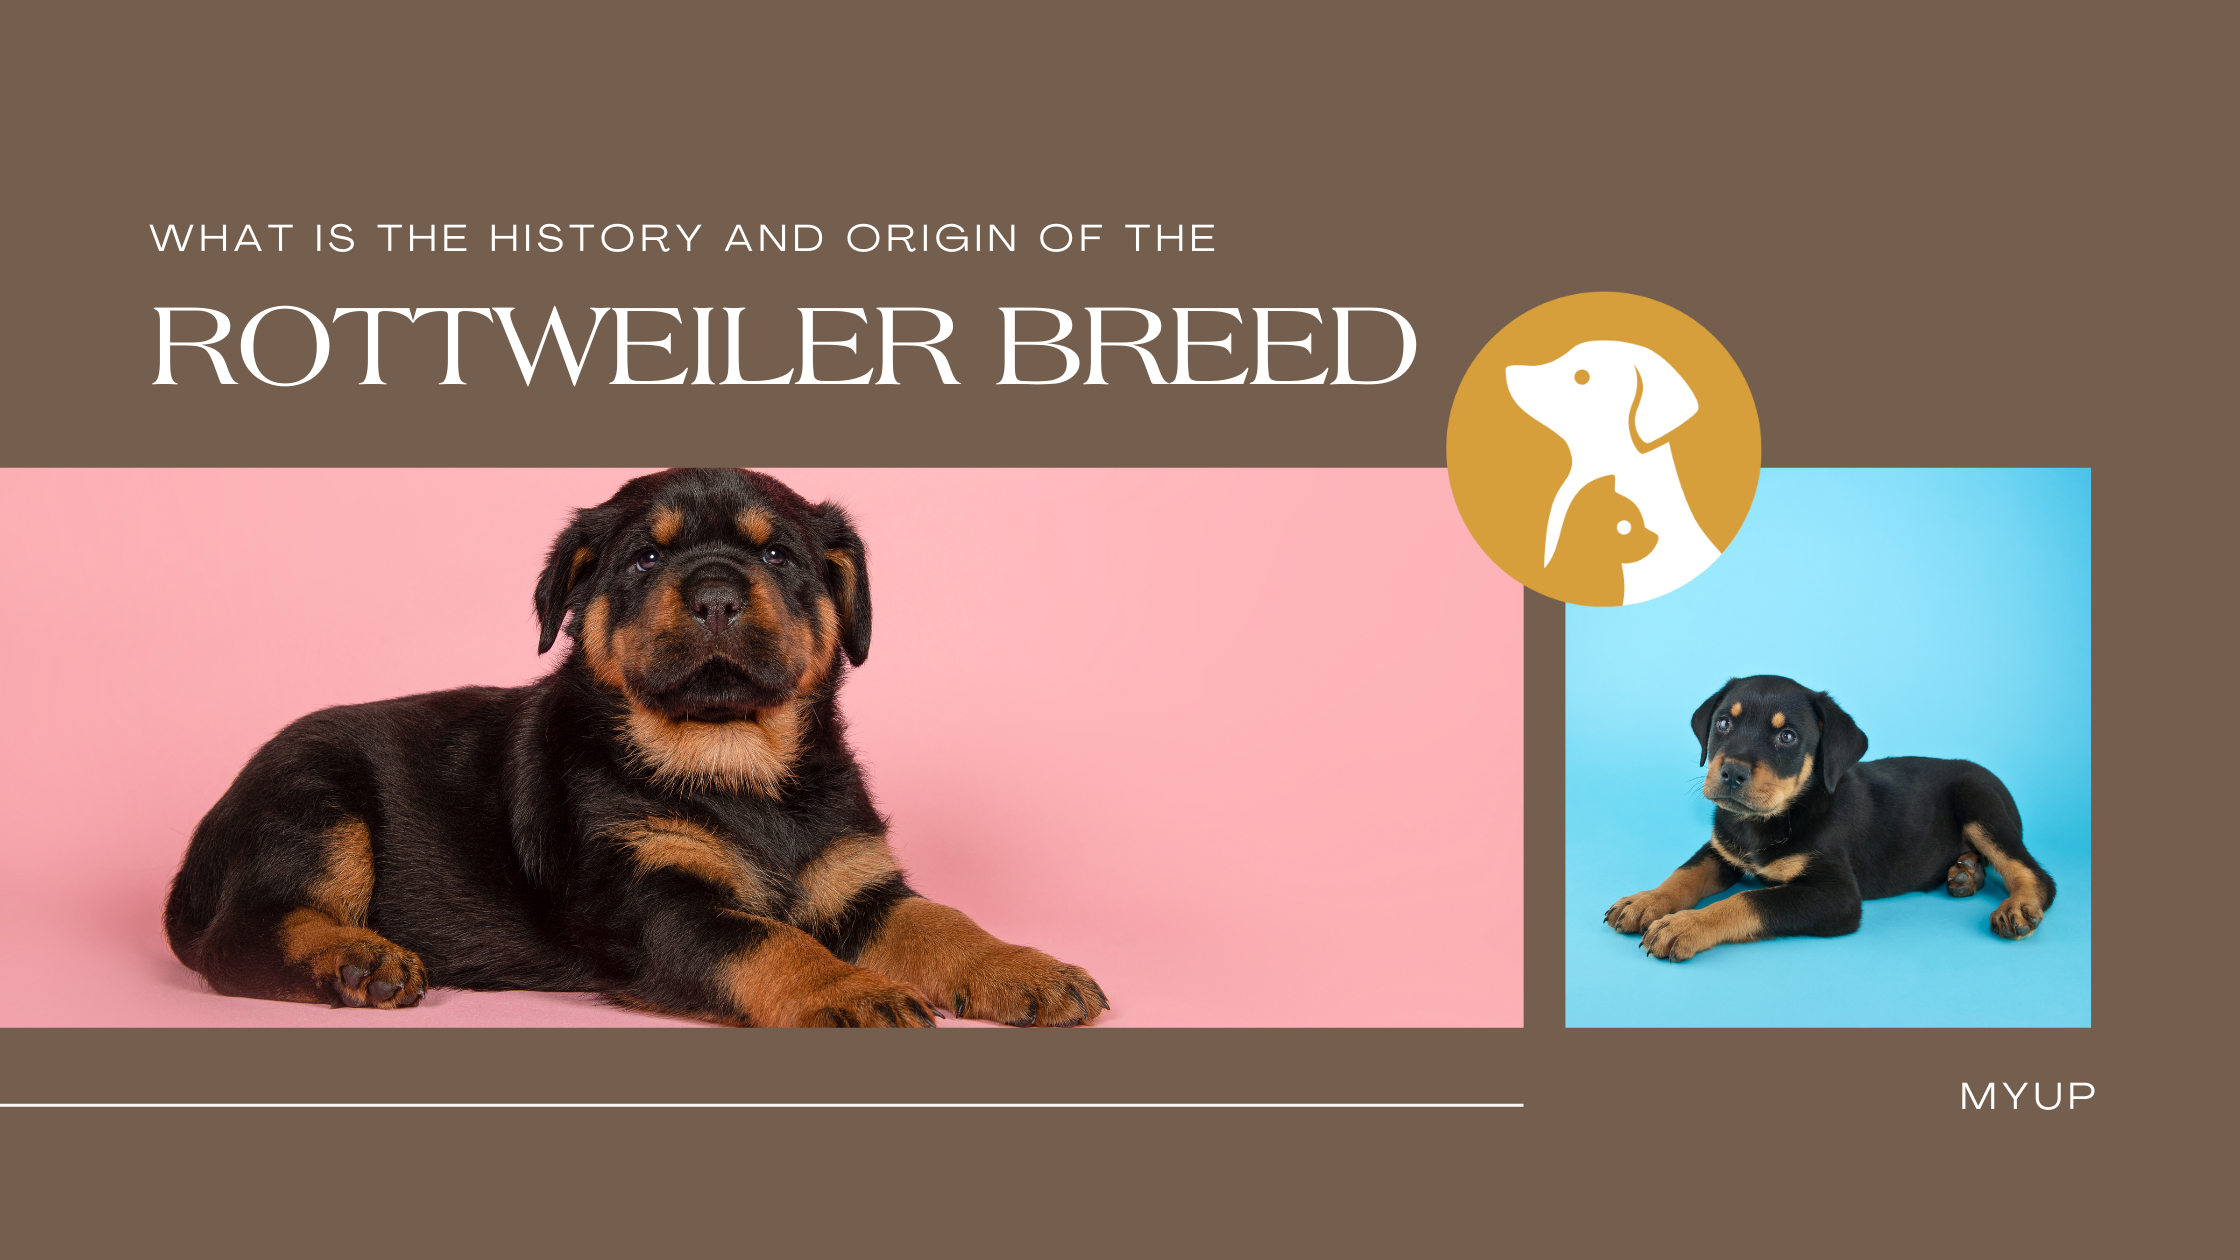 What Is The History And Origin Of The Rottweiler Breed